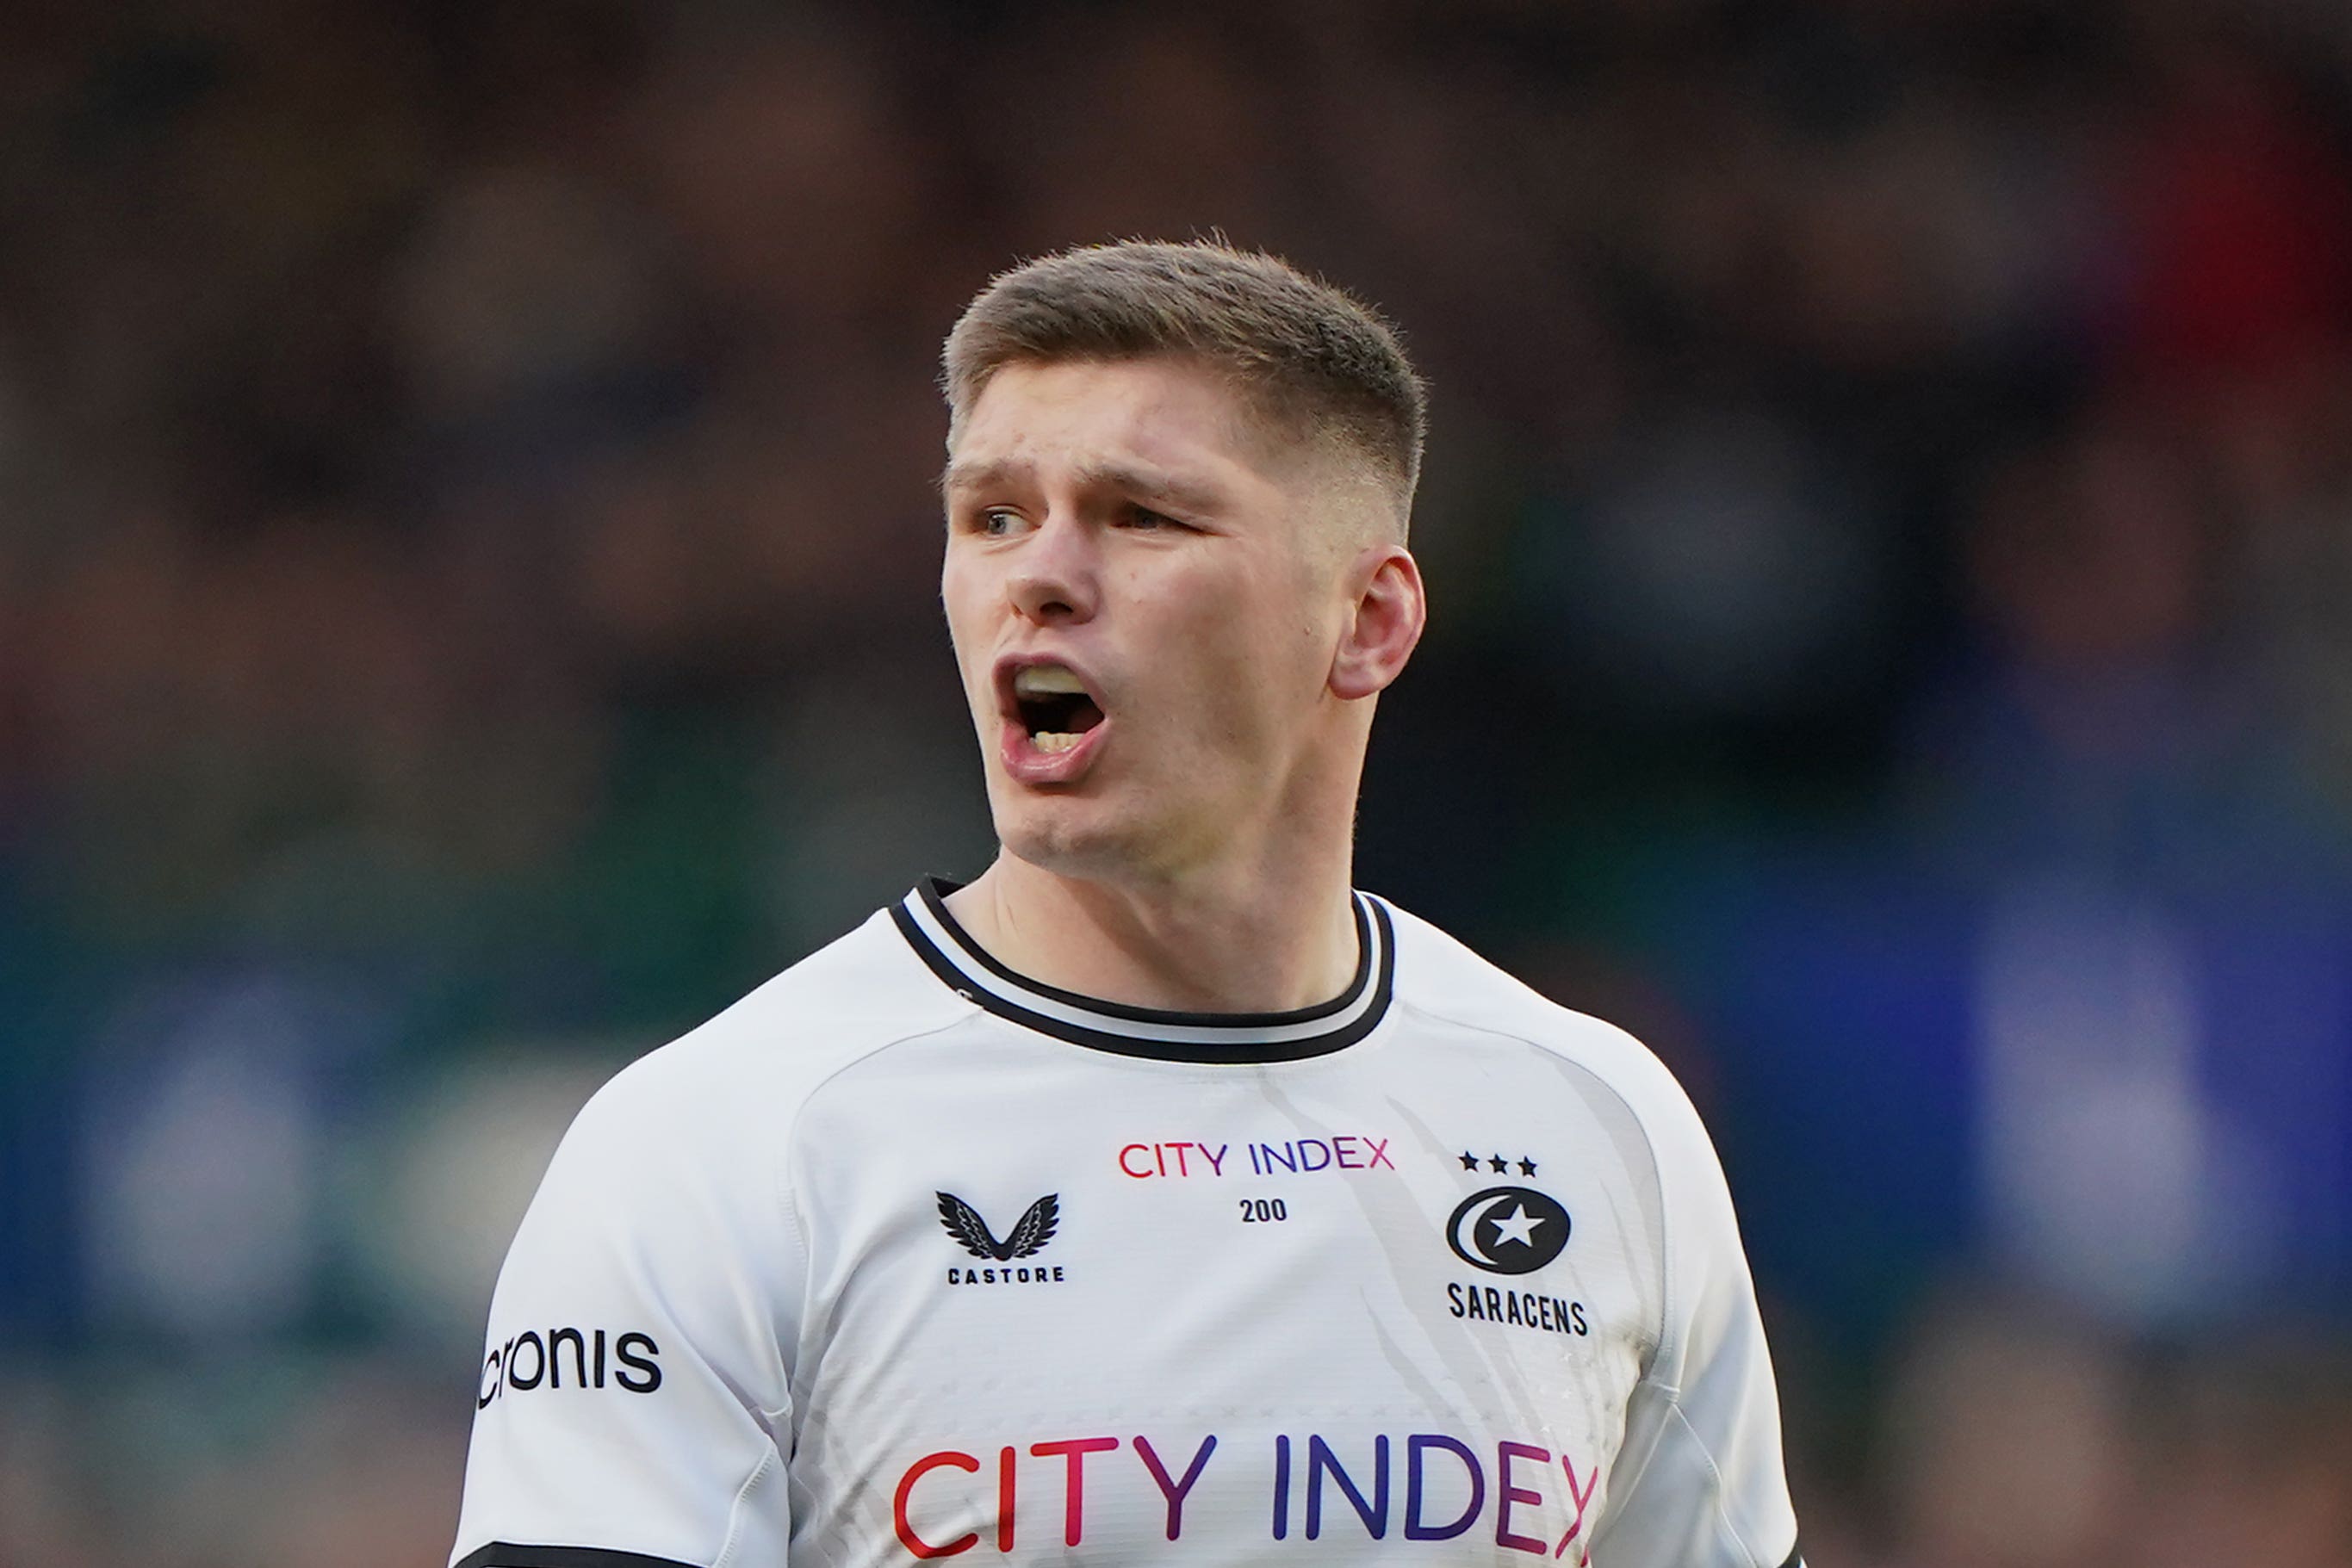 Owen Farrell is set to make his 250th appearance for Saracens against Harlequins